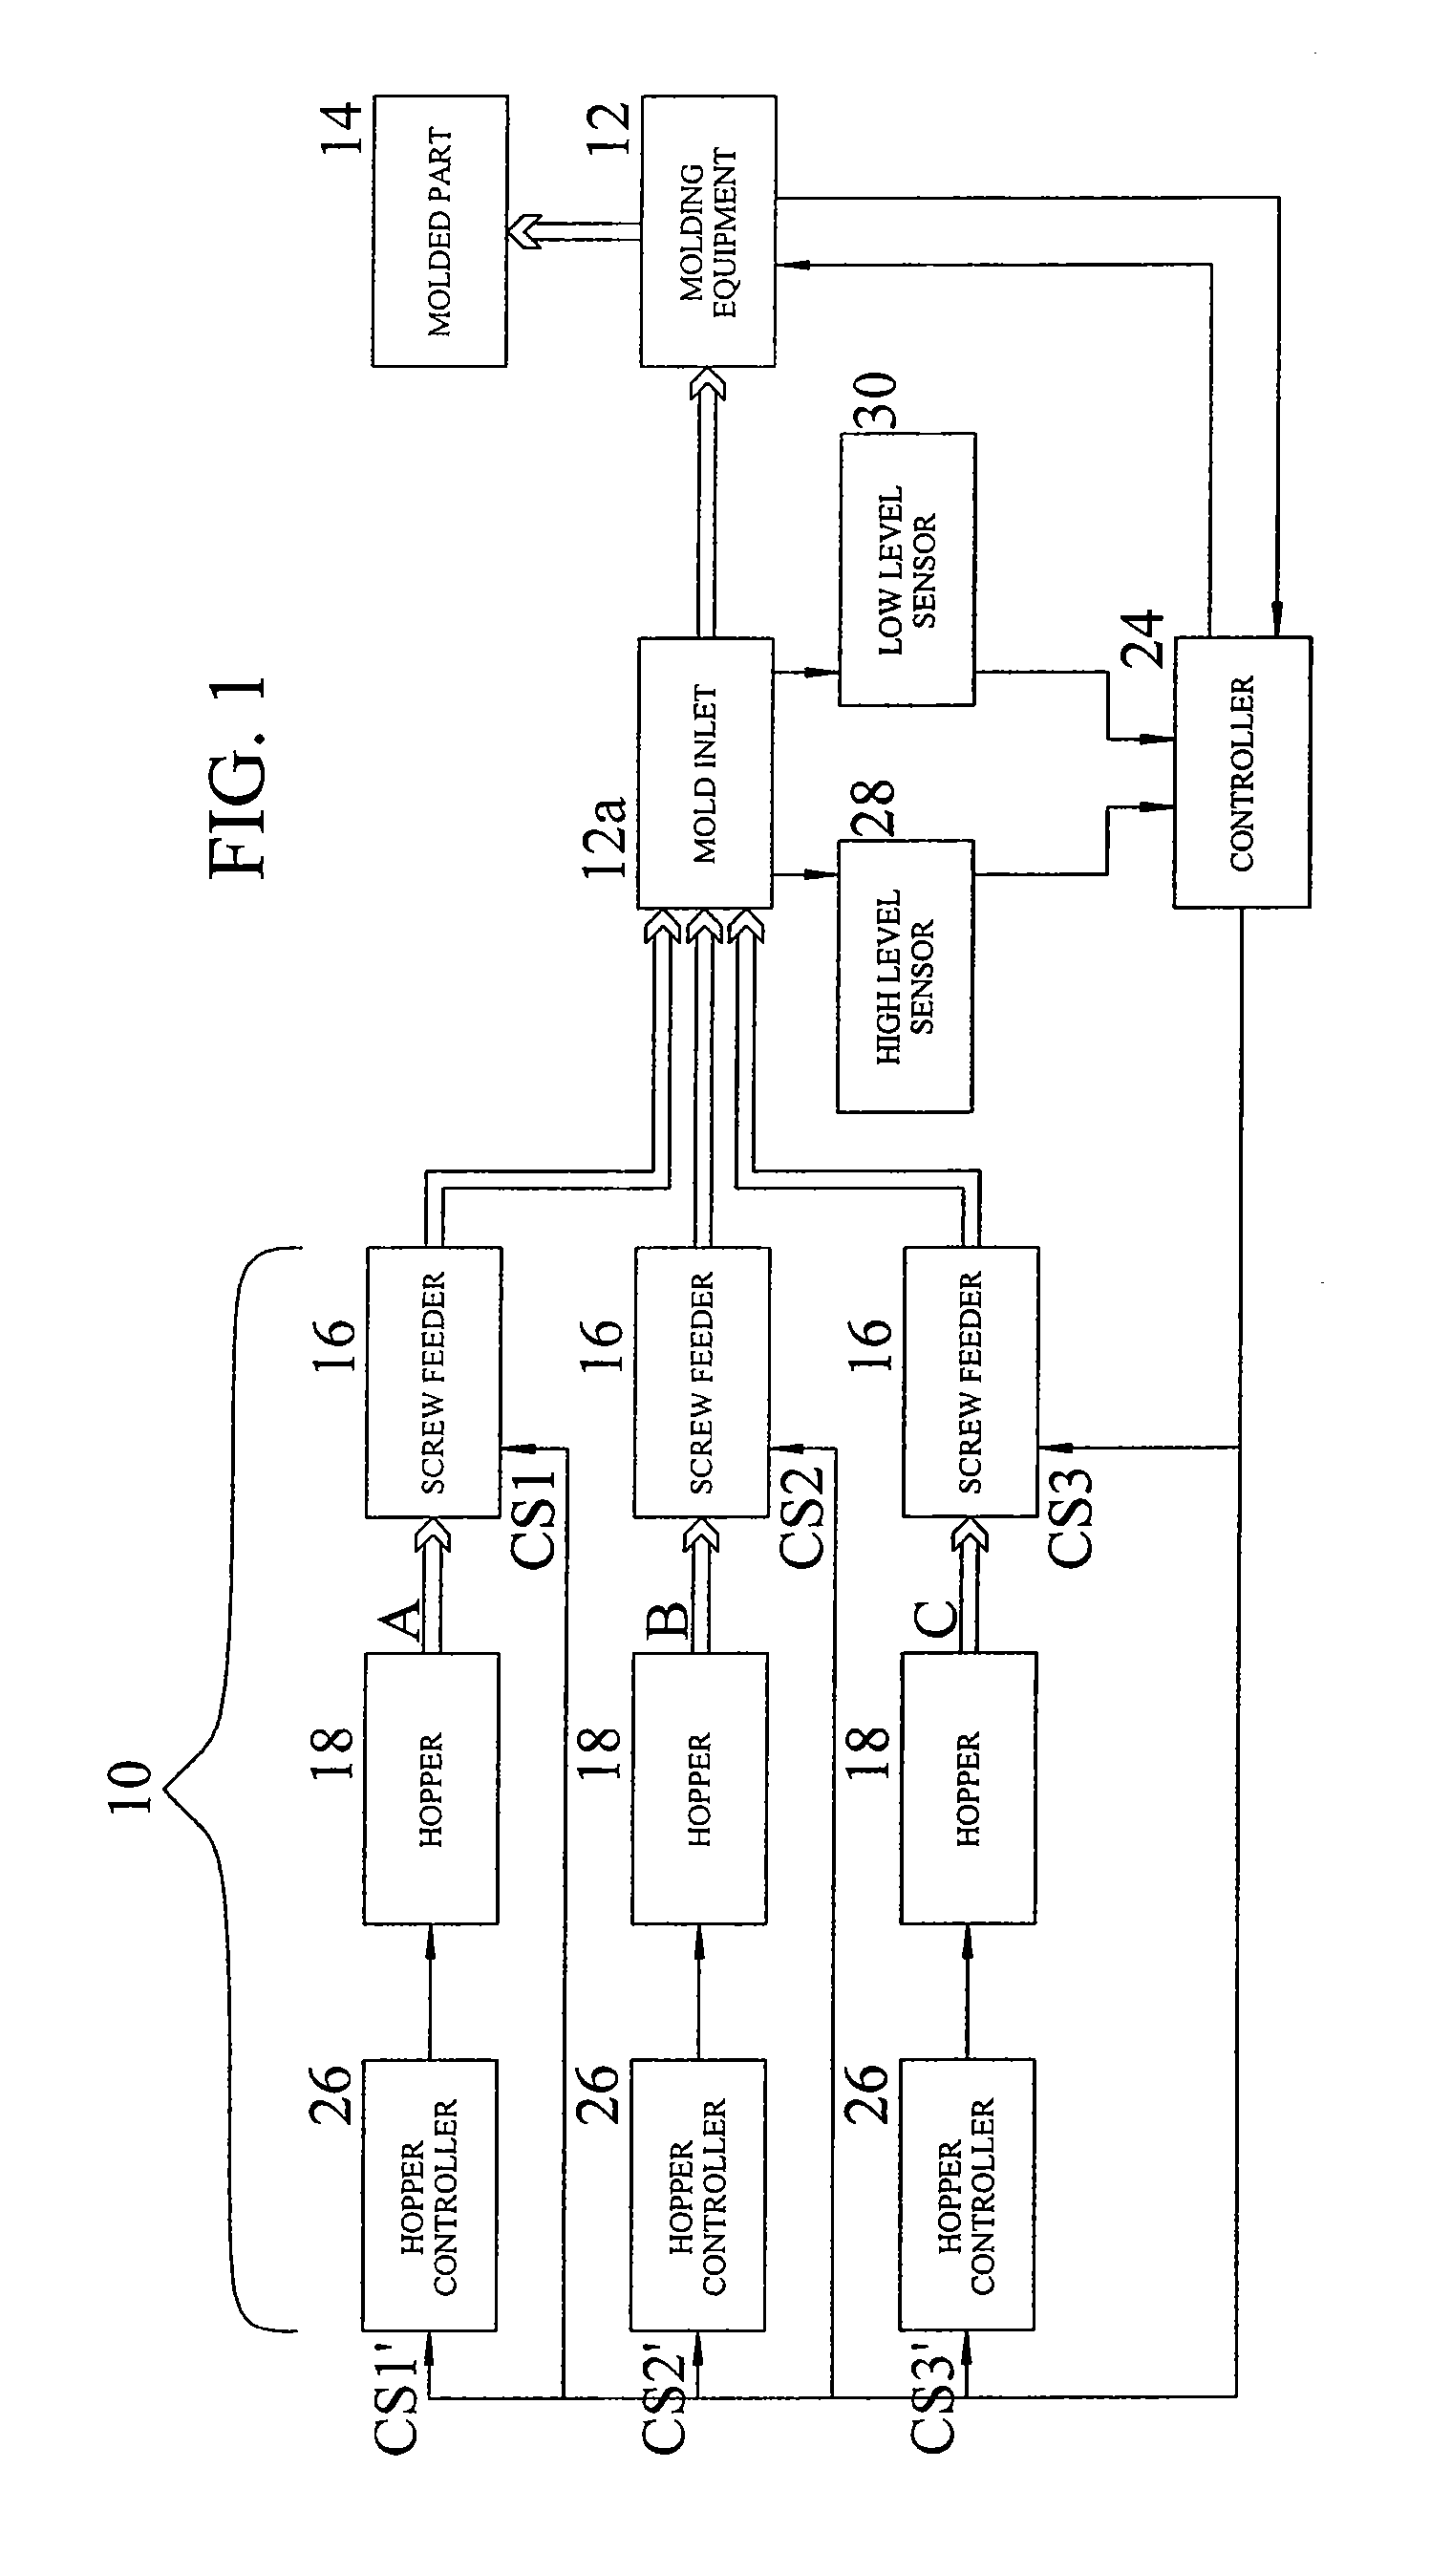 Color Variation Control Process for Molding Plastic and Composite Multi-Color Articles